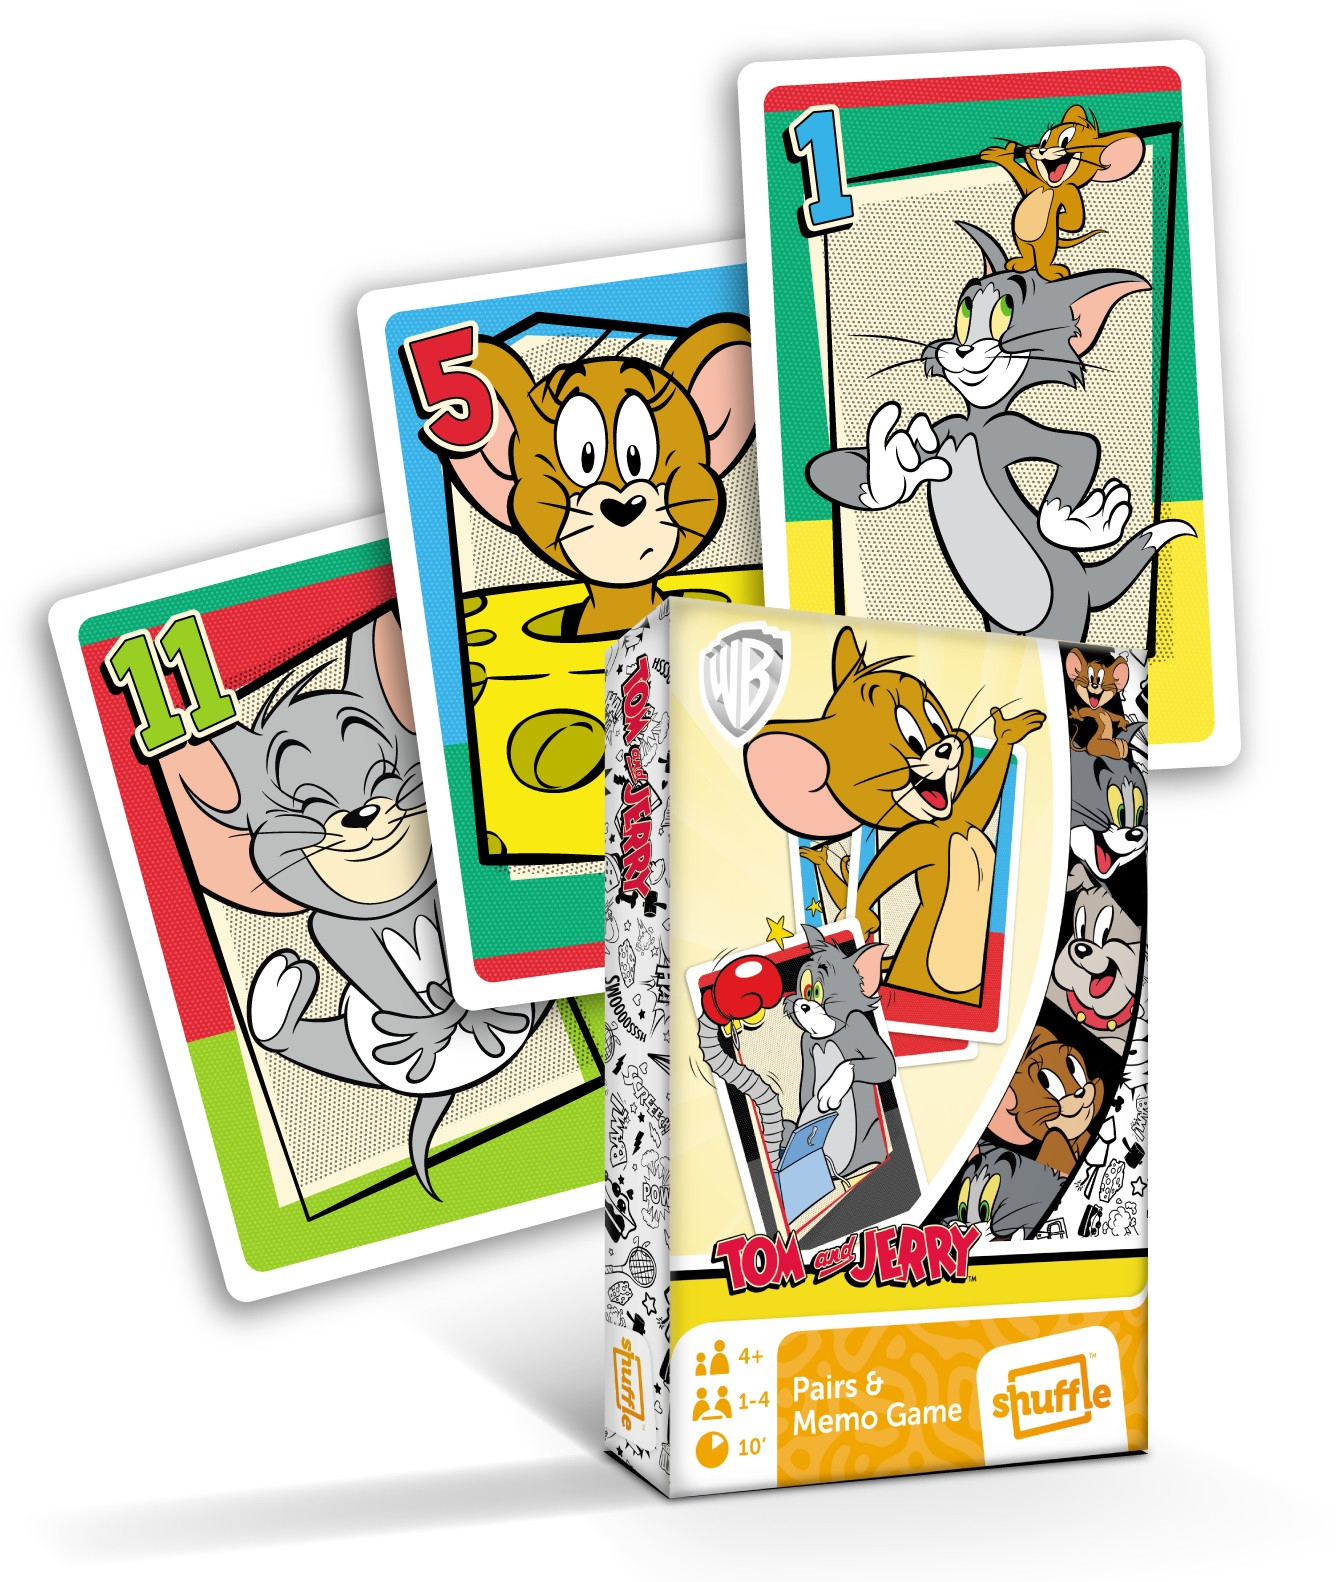 the Cards Black Peter Tom & Jerry